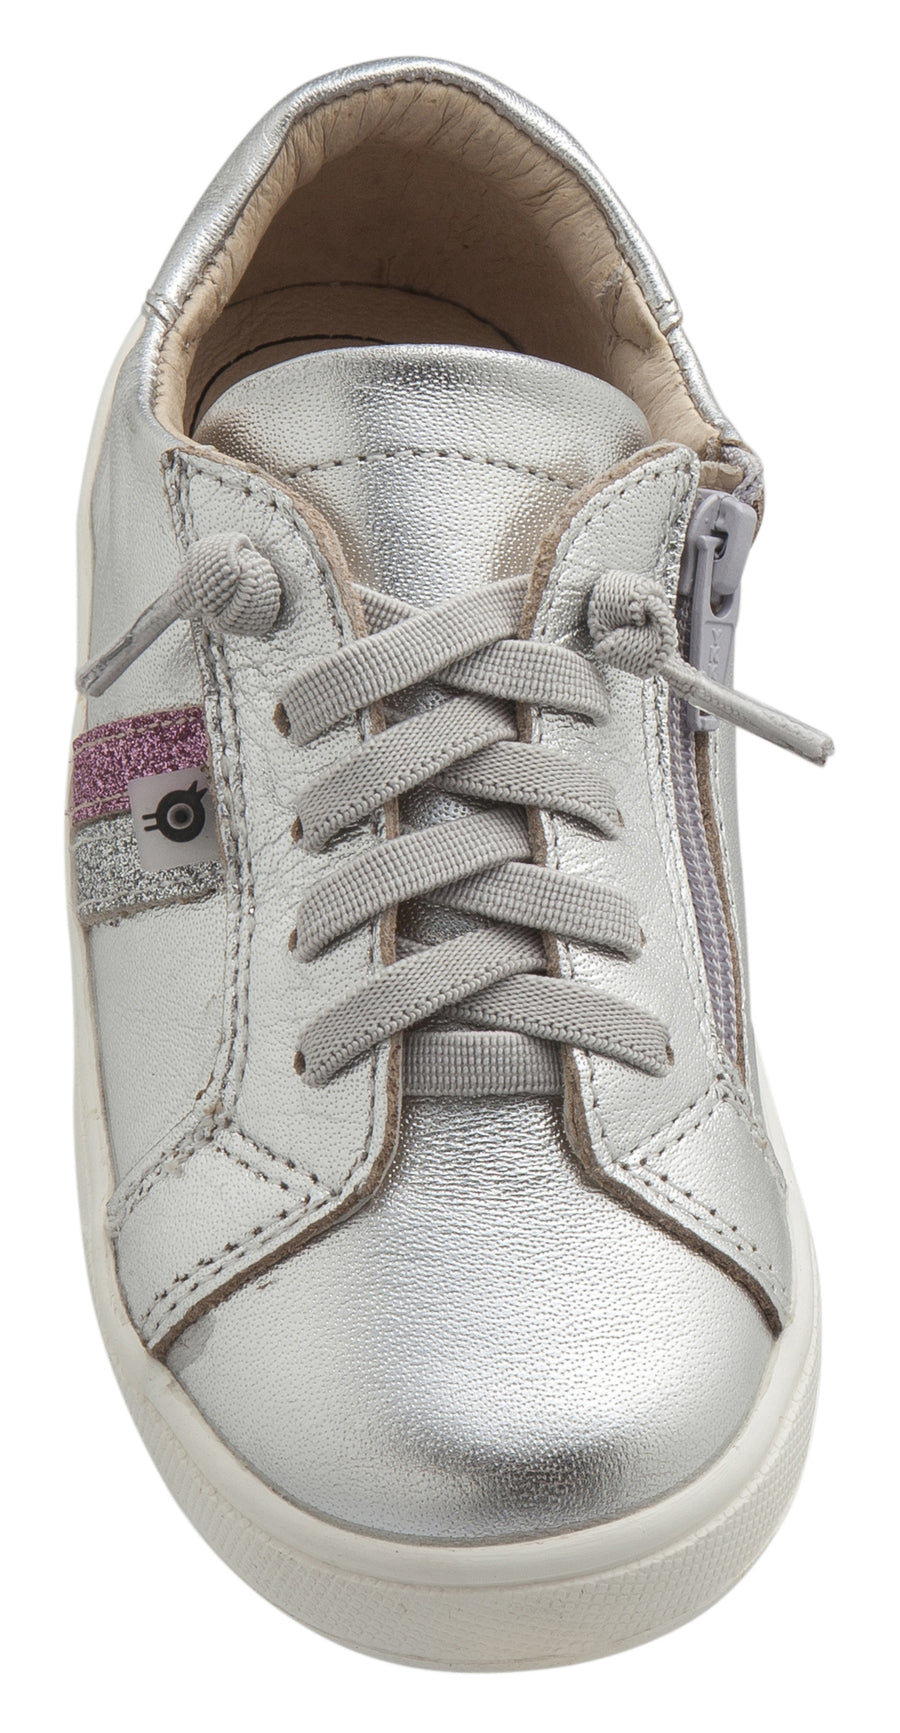 Old Soles Girl's Glambo Leather Sneakers, Silver/Glam Argent/Glam Pink